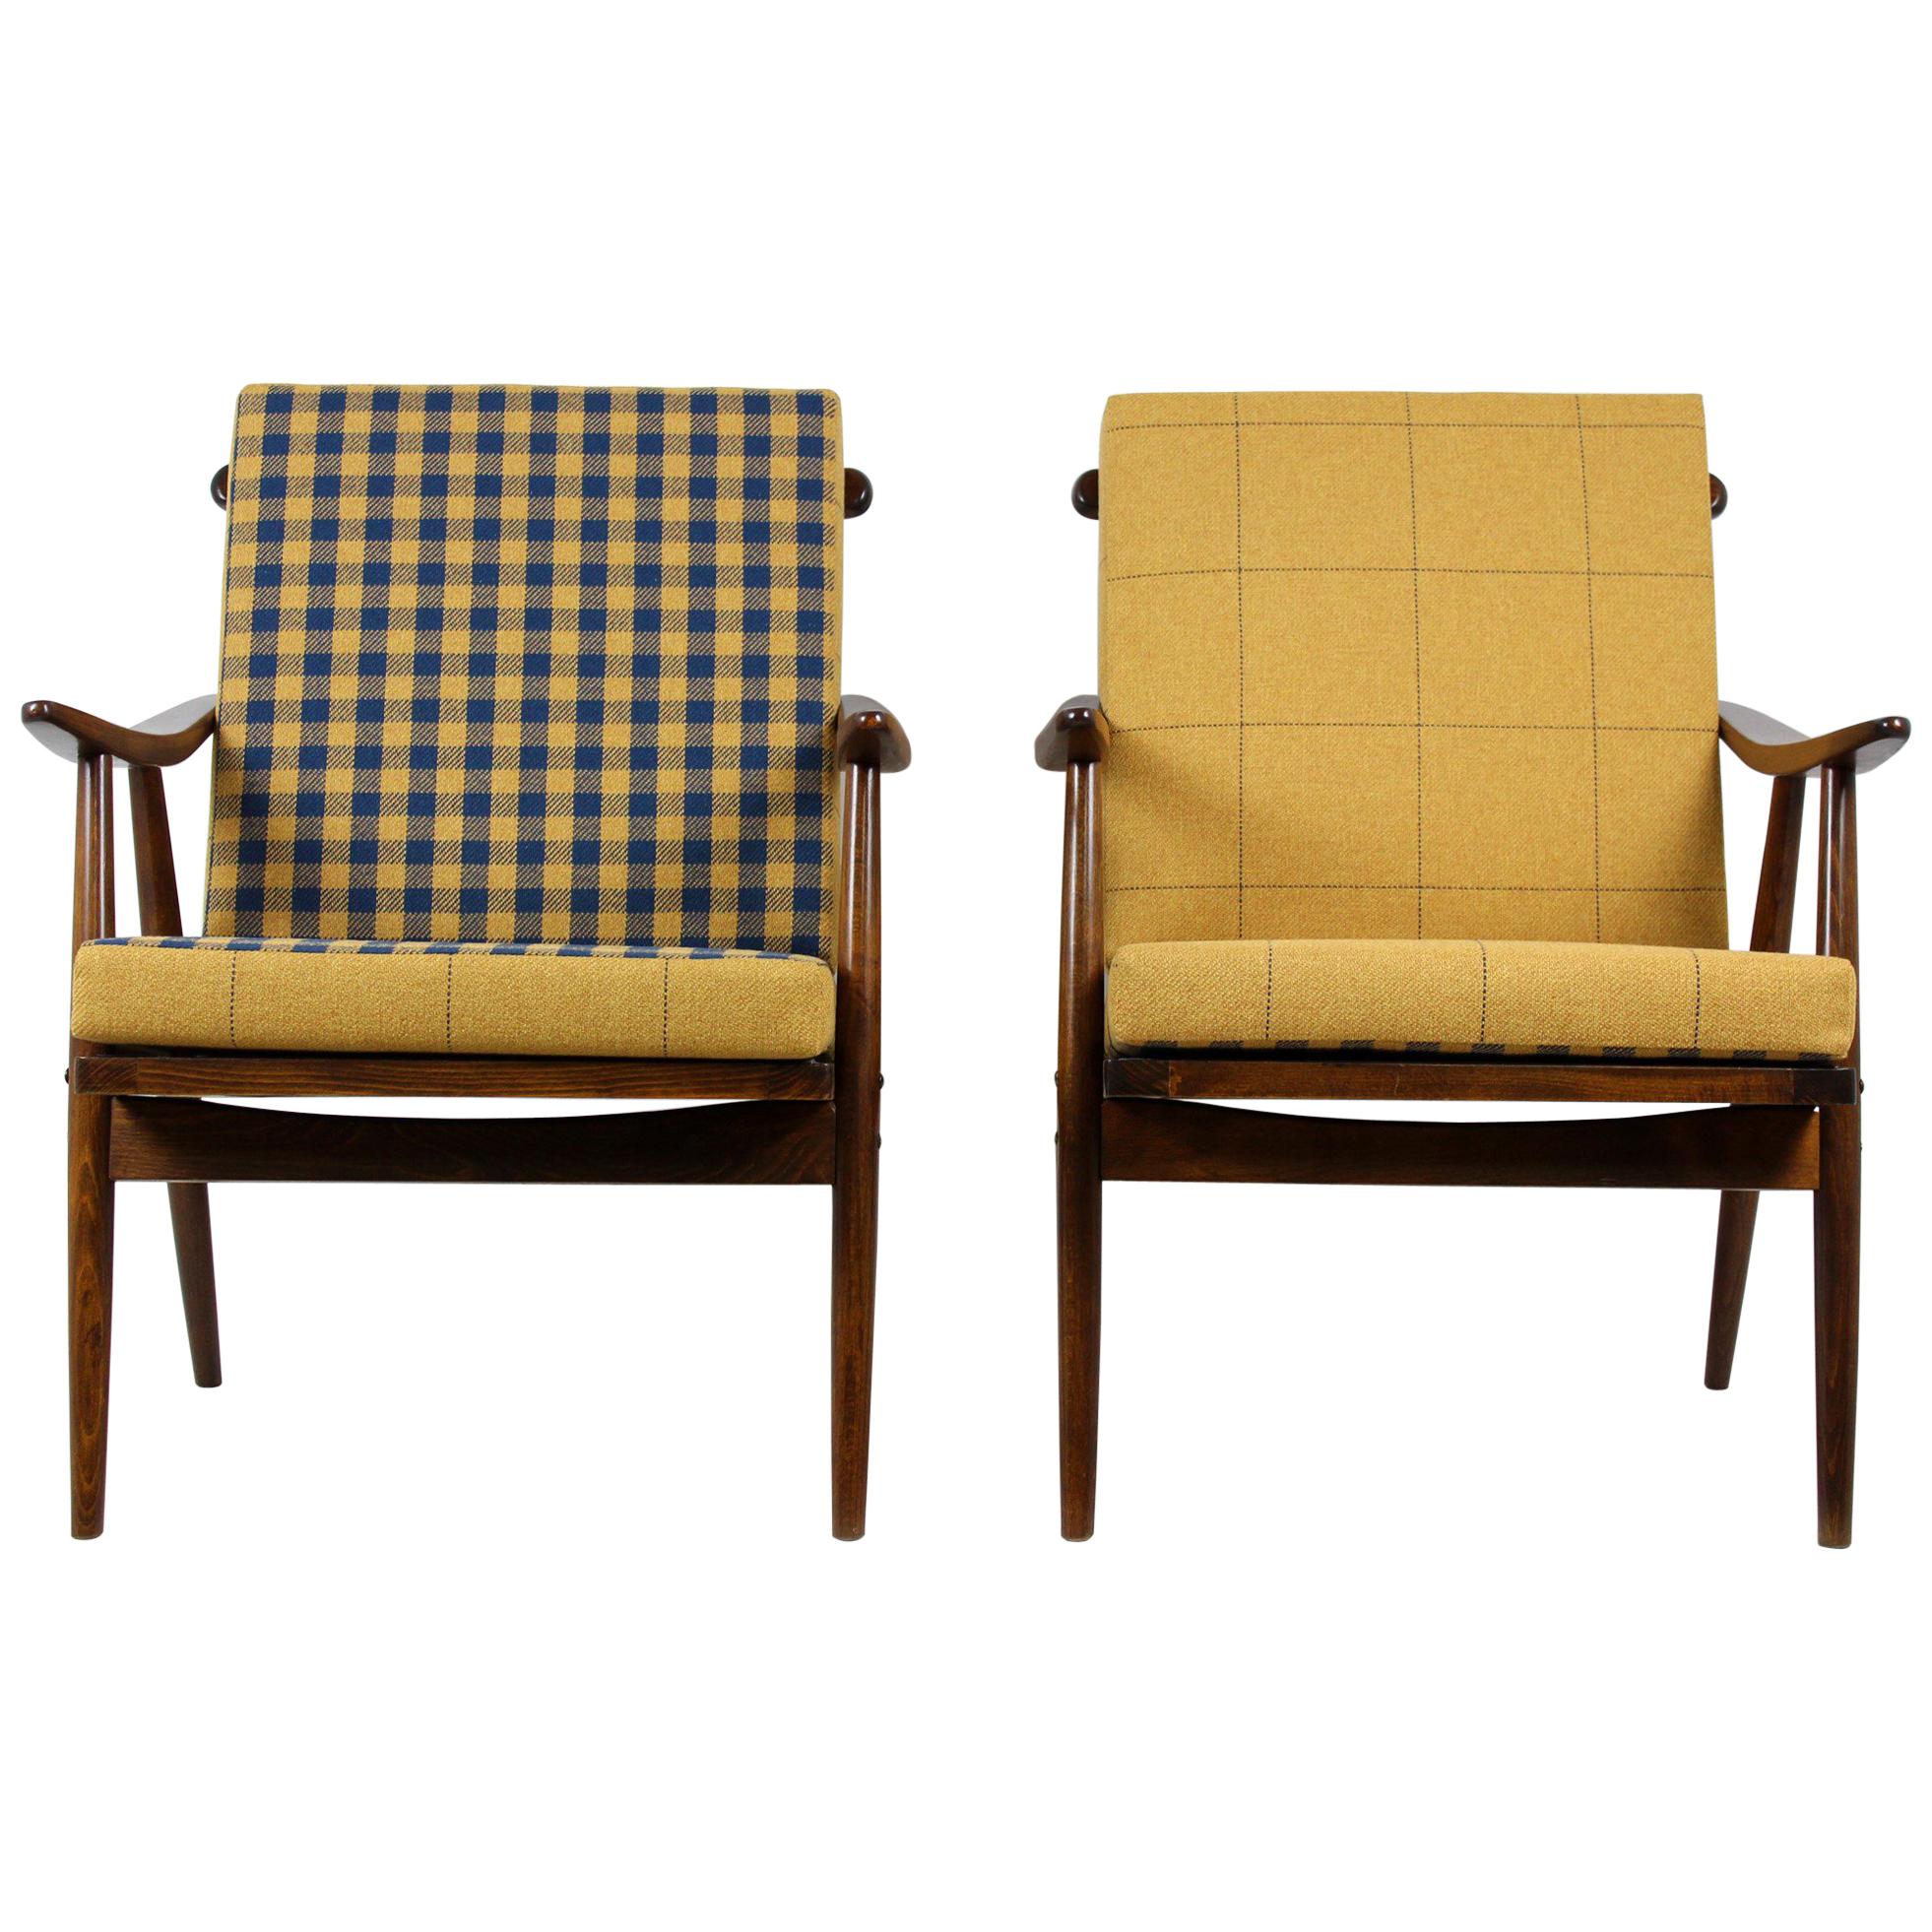 Wooden Armchairs from TON with Double-Sided Checkered Pillows, 1970s, Set of Two